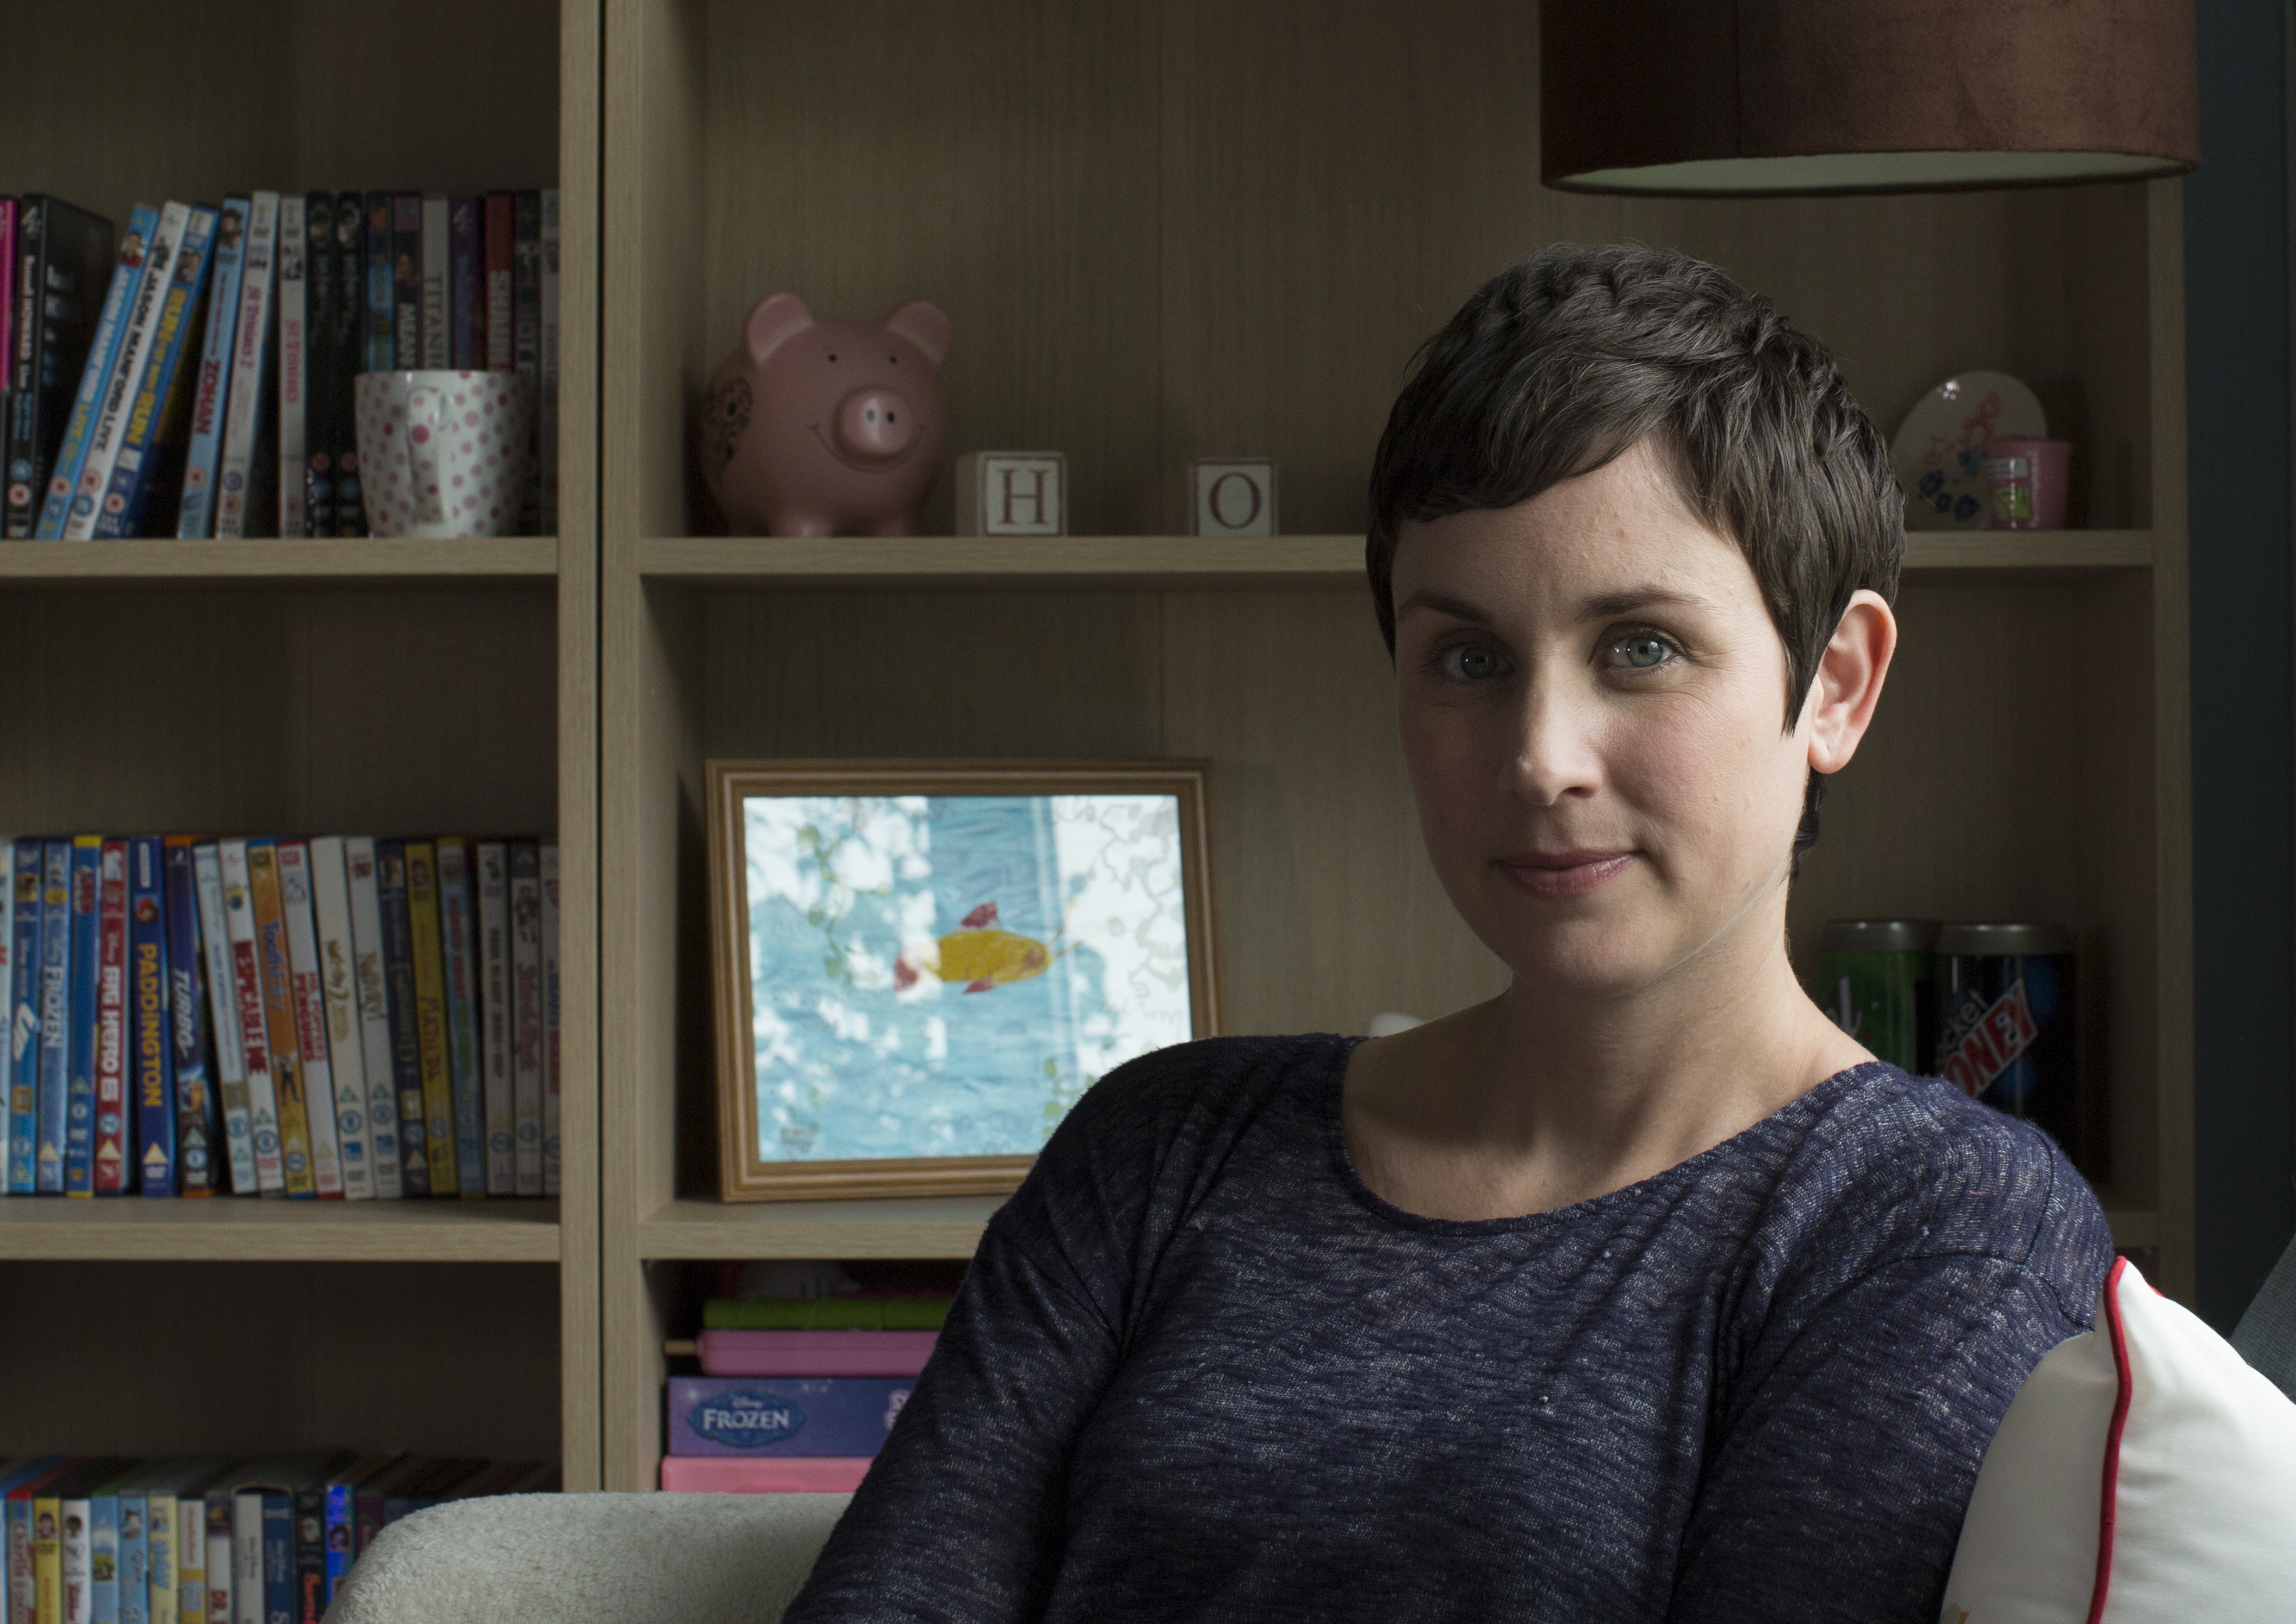 Emma Young, 36 was diagnosed with secondary breast cancer in 2014